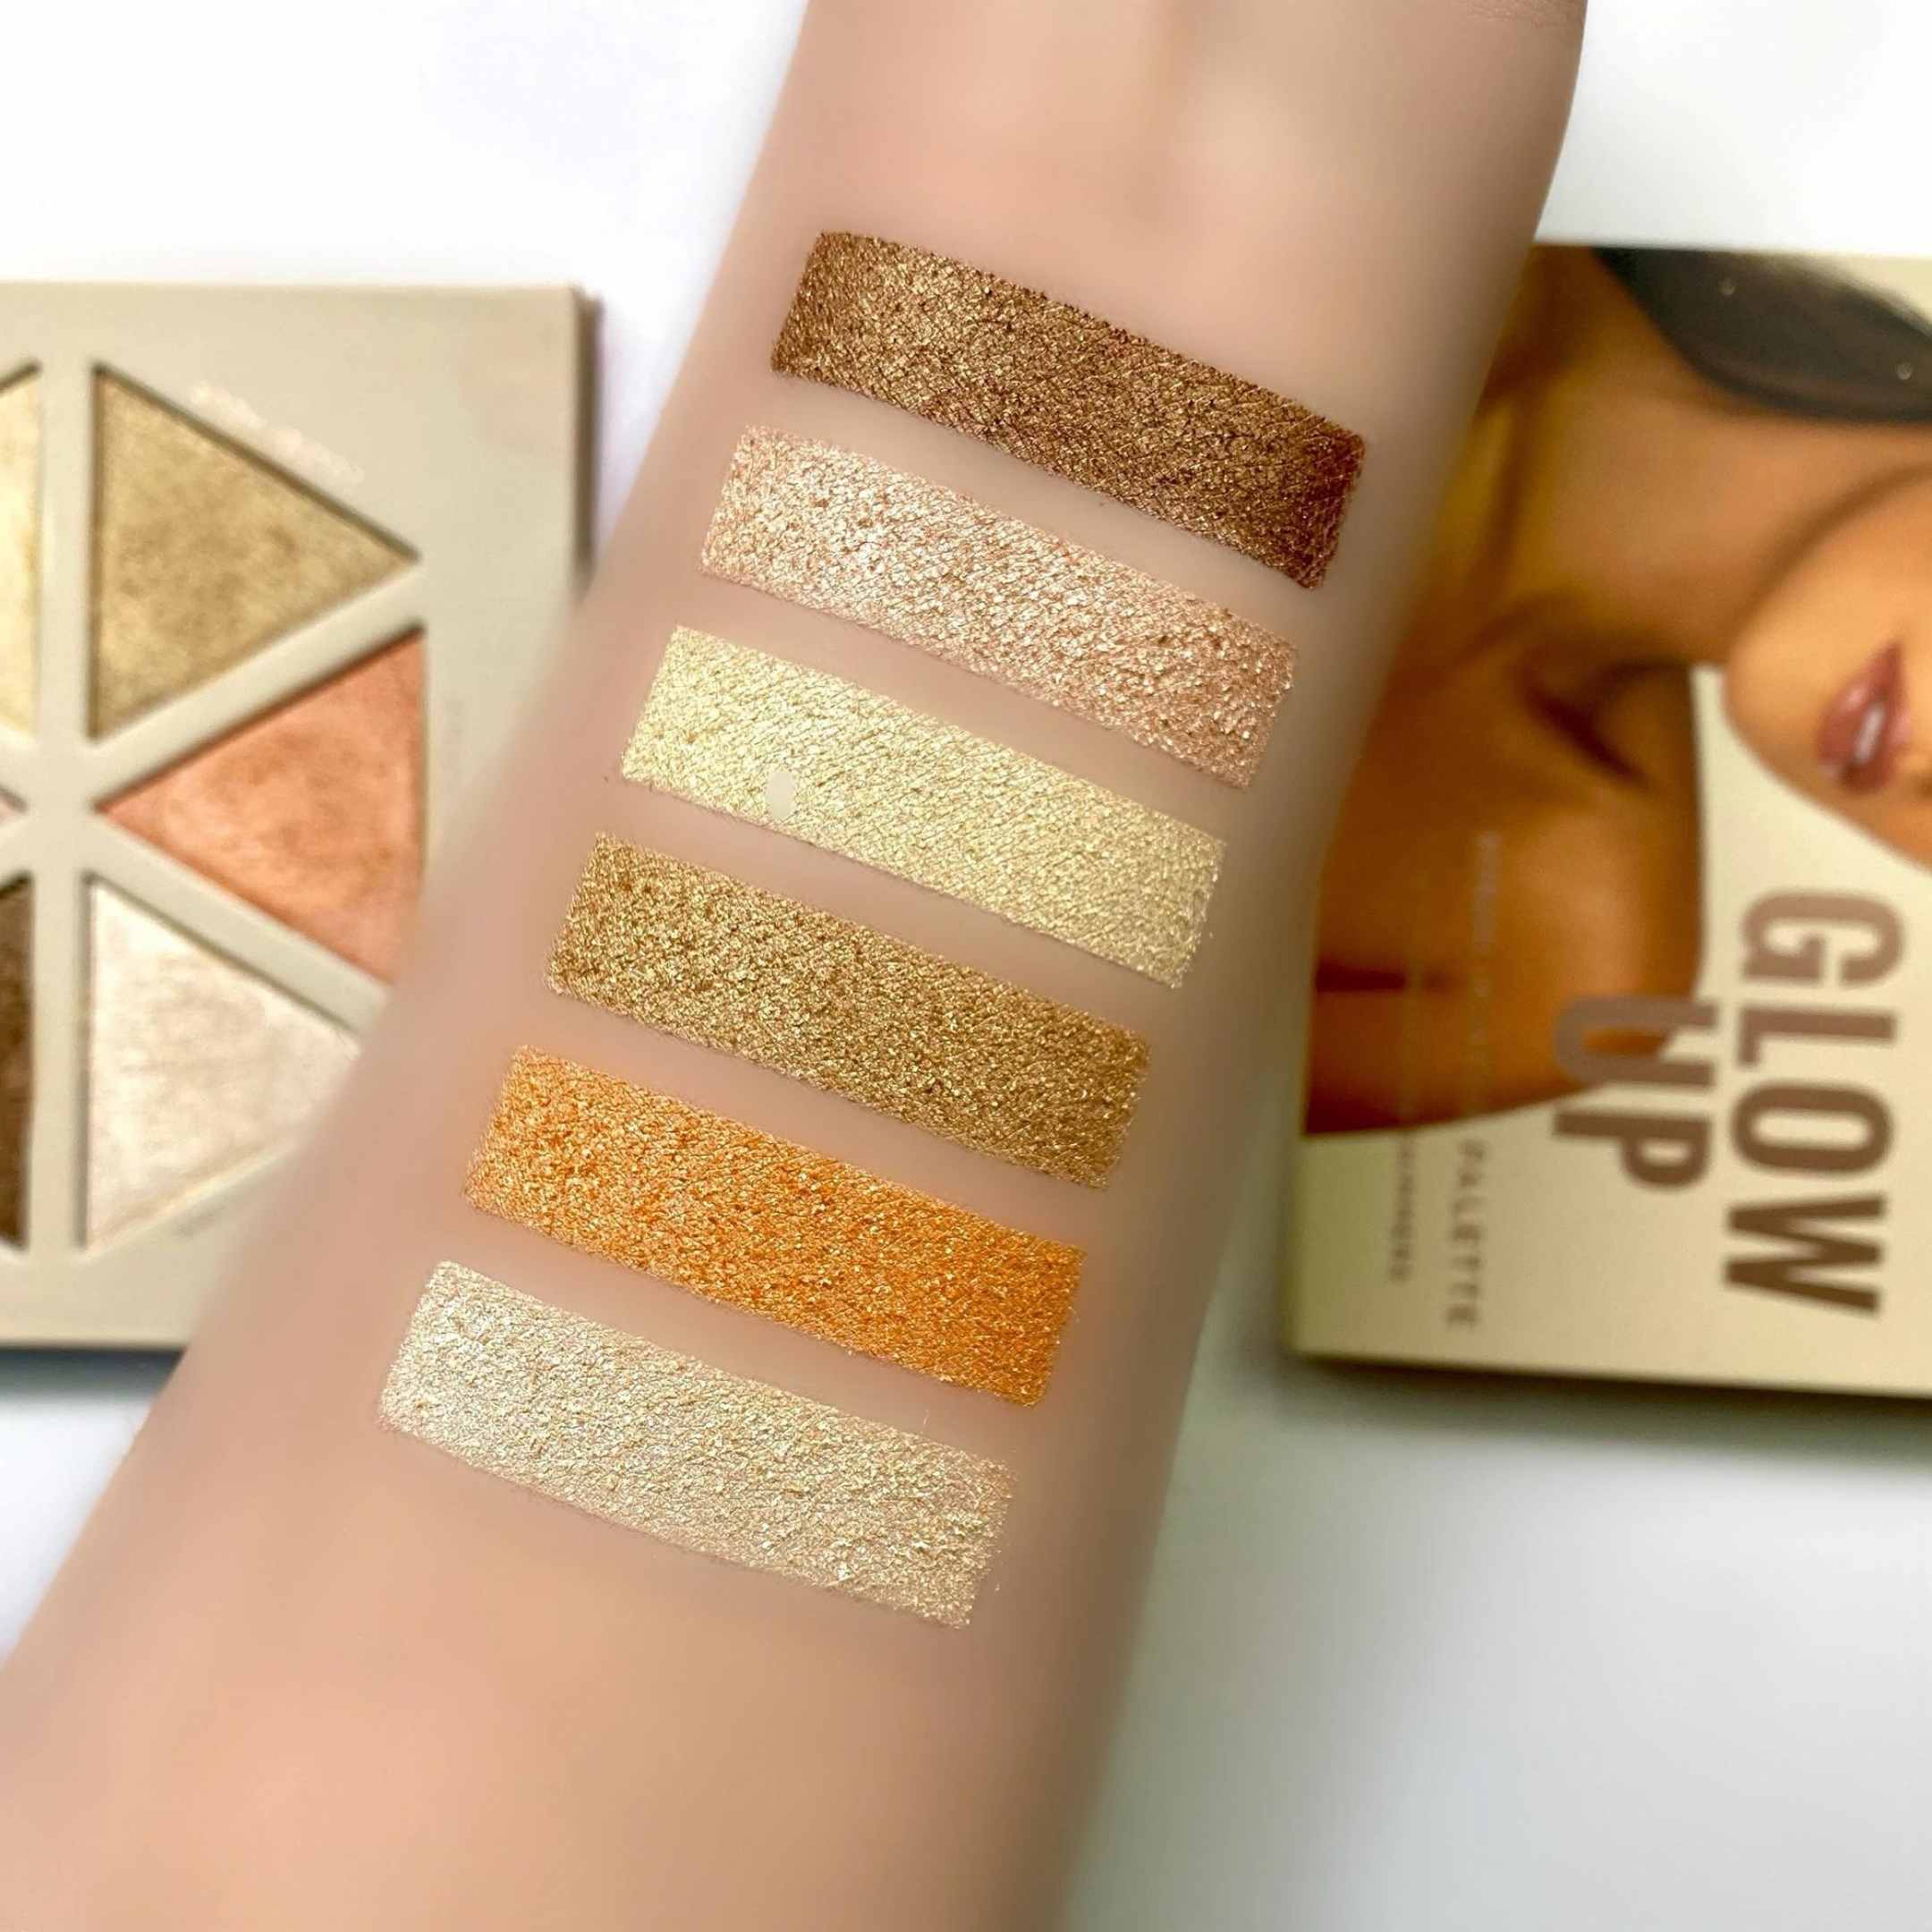  SOSU Glow Up Highlighter Palette Colour Swatch